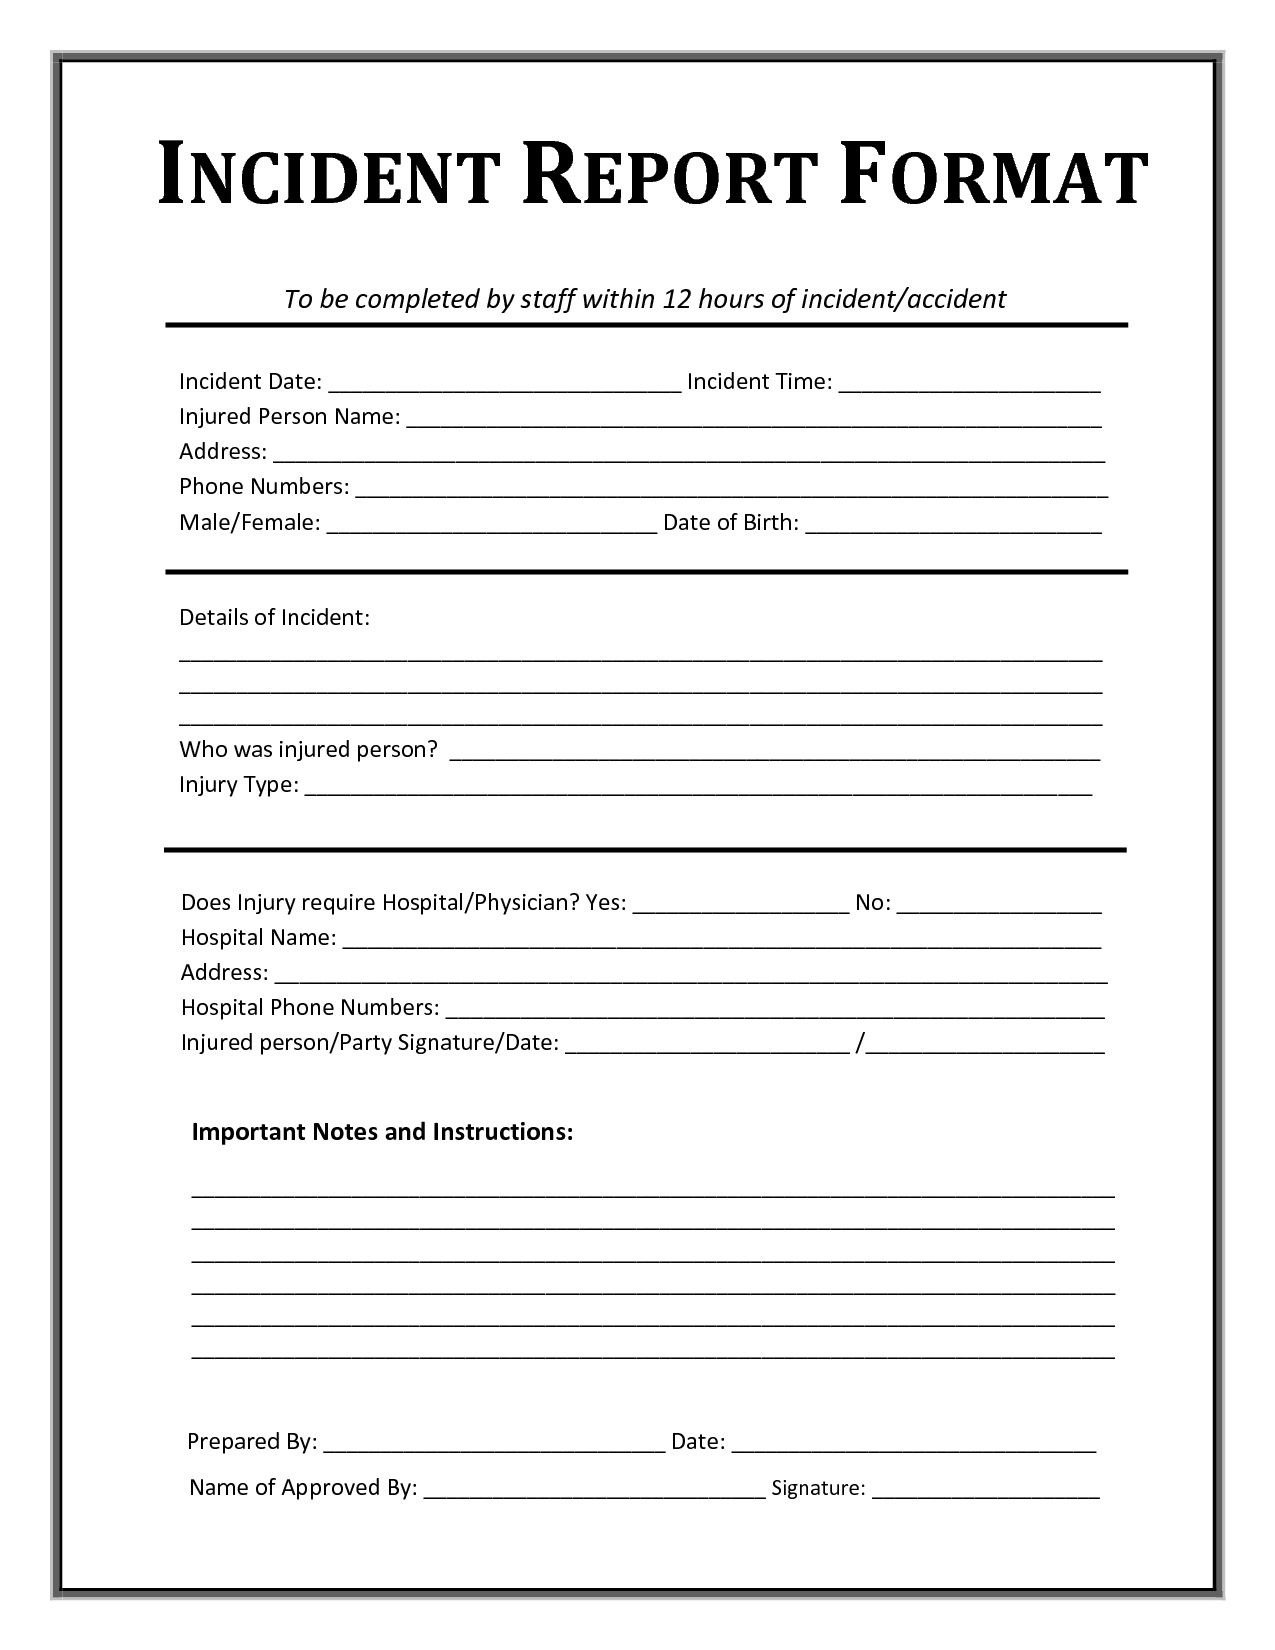 Incident Report Form Template Doc – Atlantaauctionco With Incident Report Form Template Doc